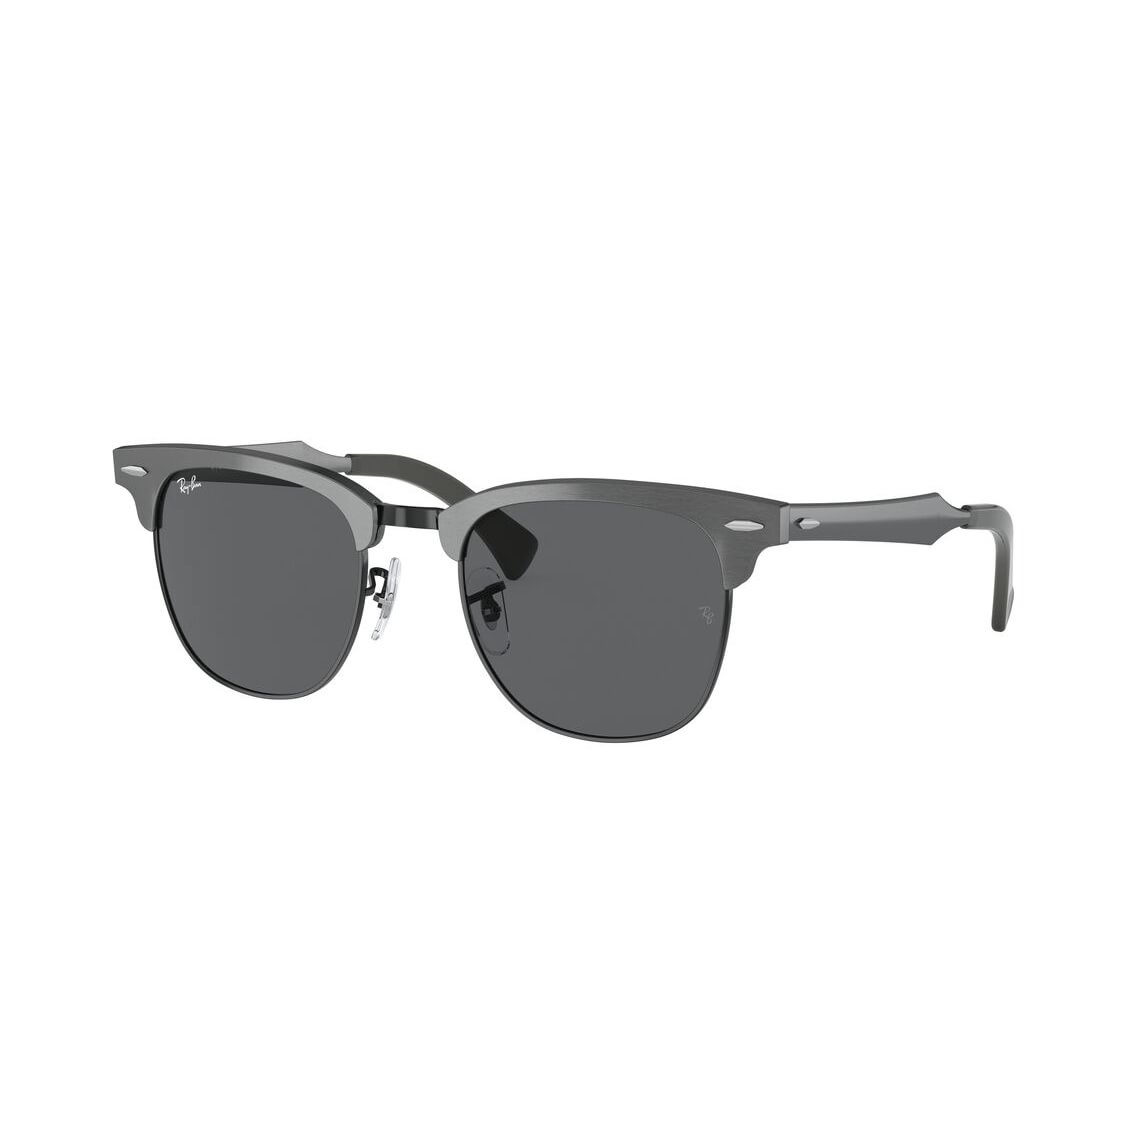 Ray-Ban Clubmaster Aluminum RB3507 9247B1 5121